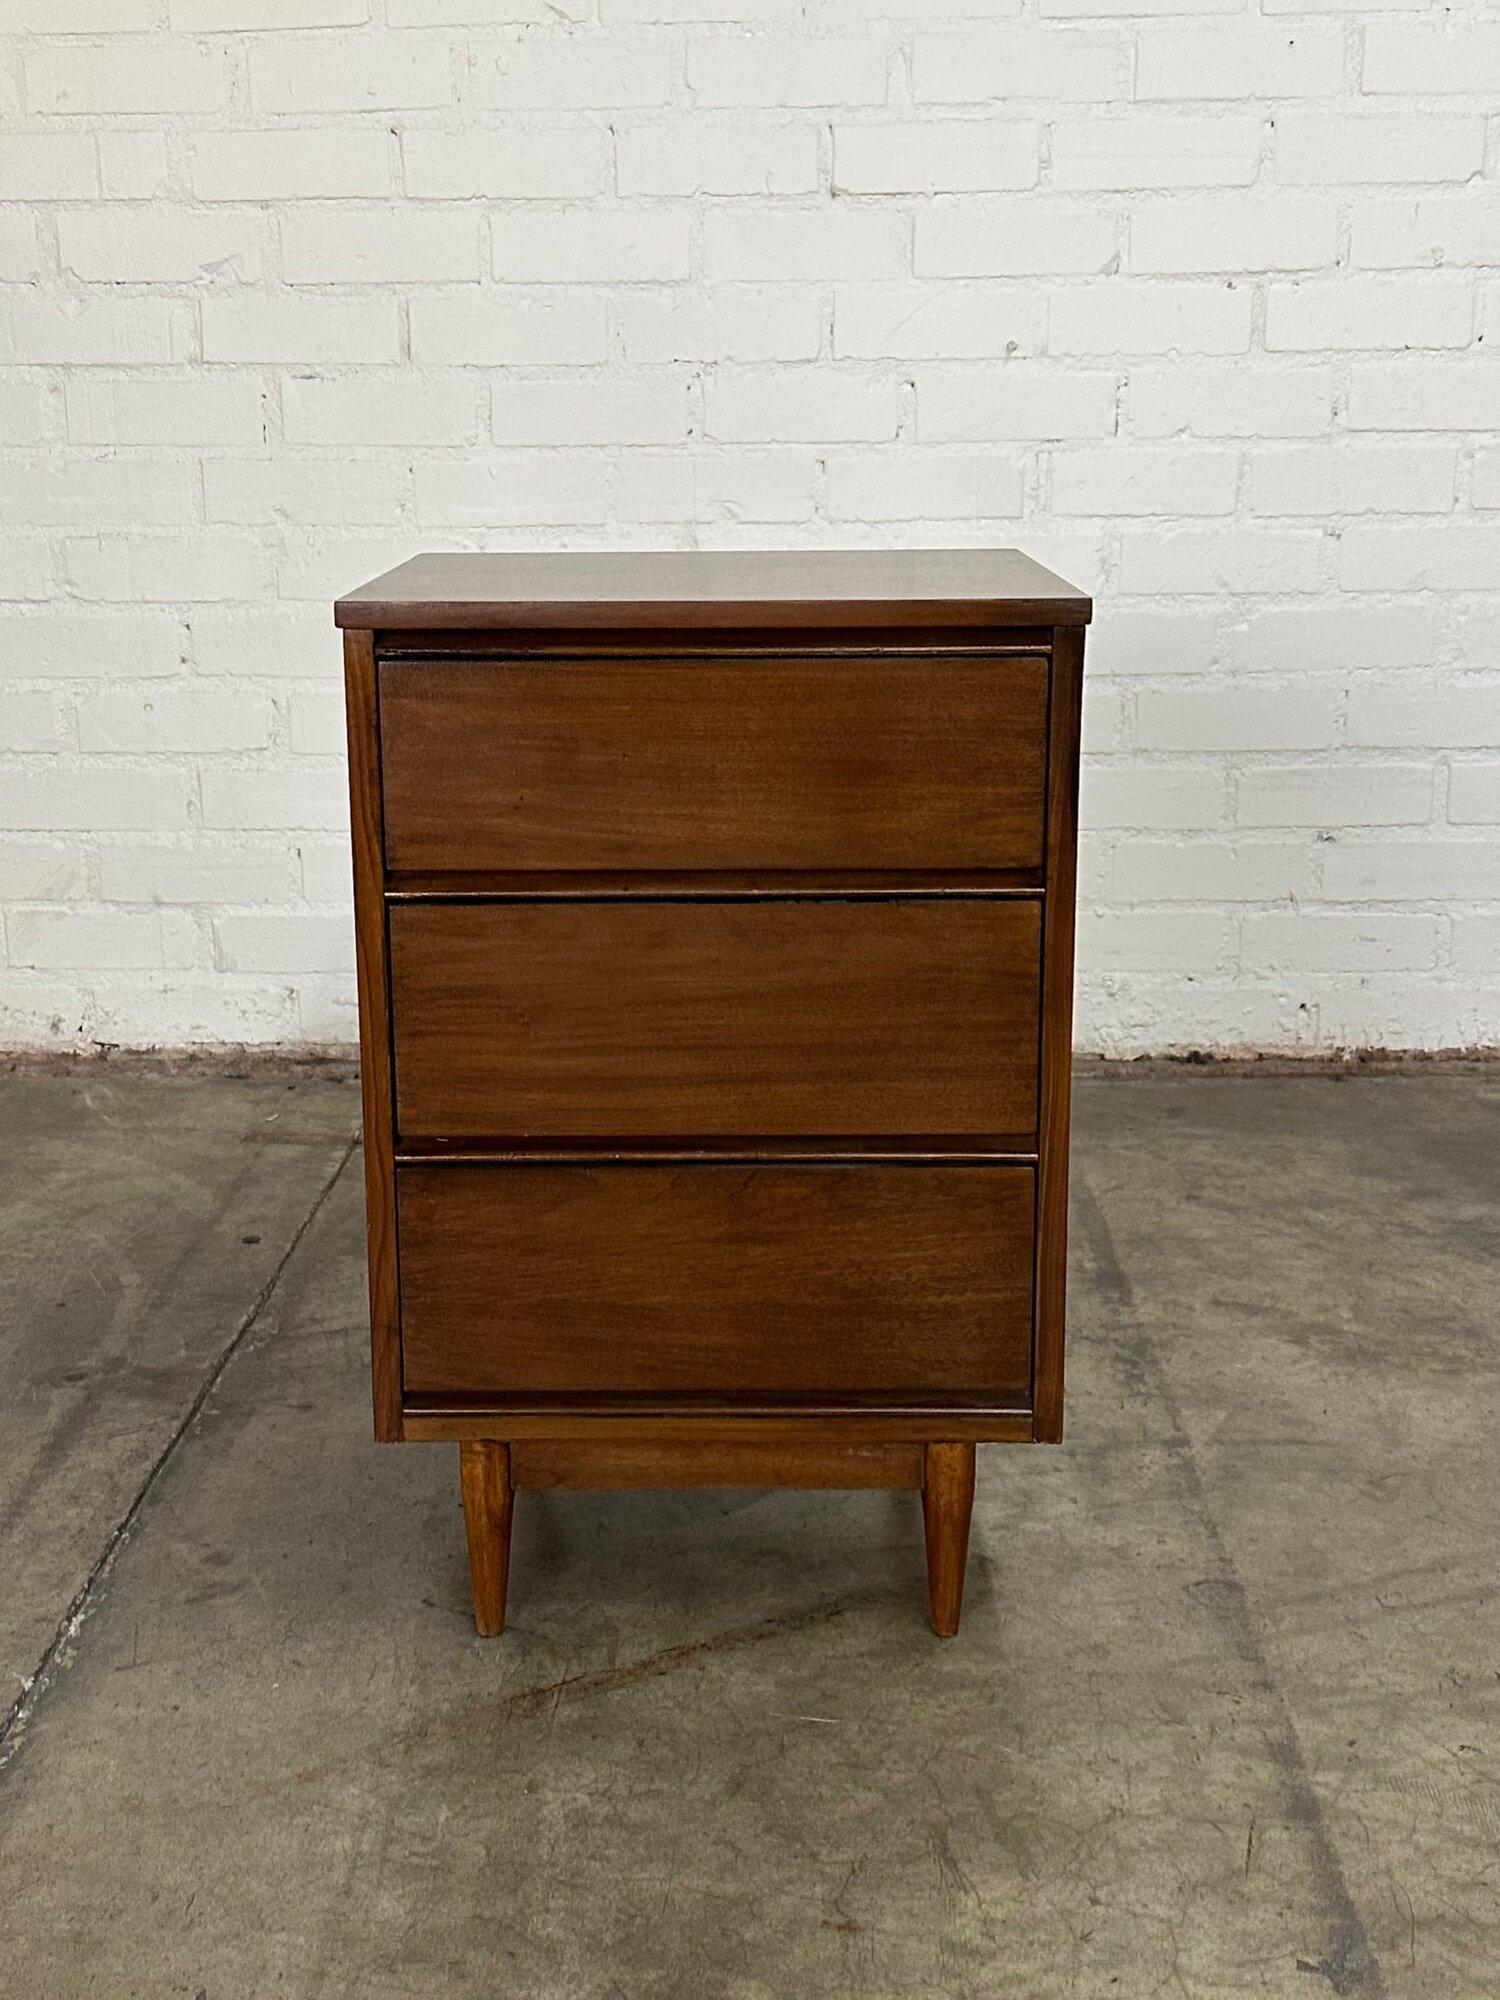 W20.5 D18 H31

Compact three drawer dresser in fully restored condition. Item is structurally sound and fully functional. This small dresser has hidden pulls underneath each drawer. 